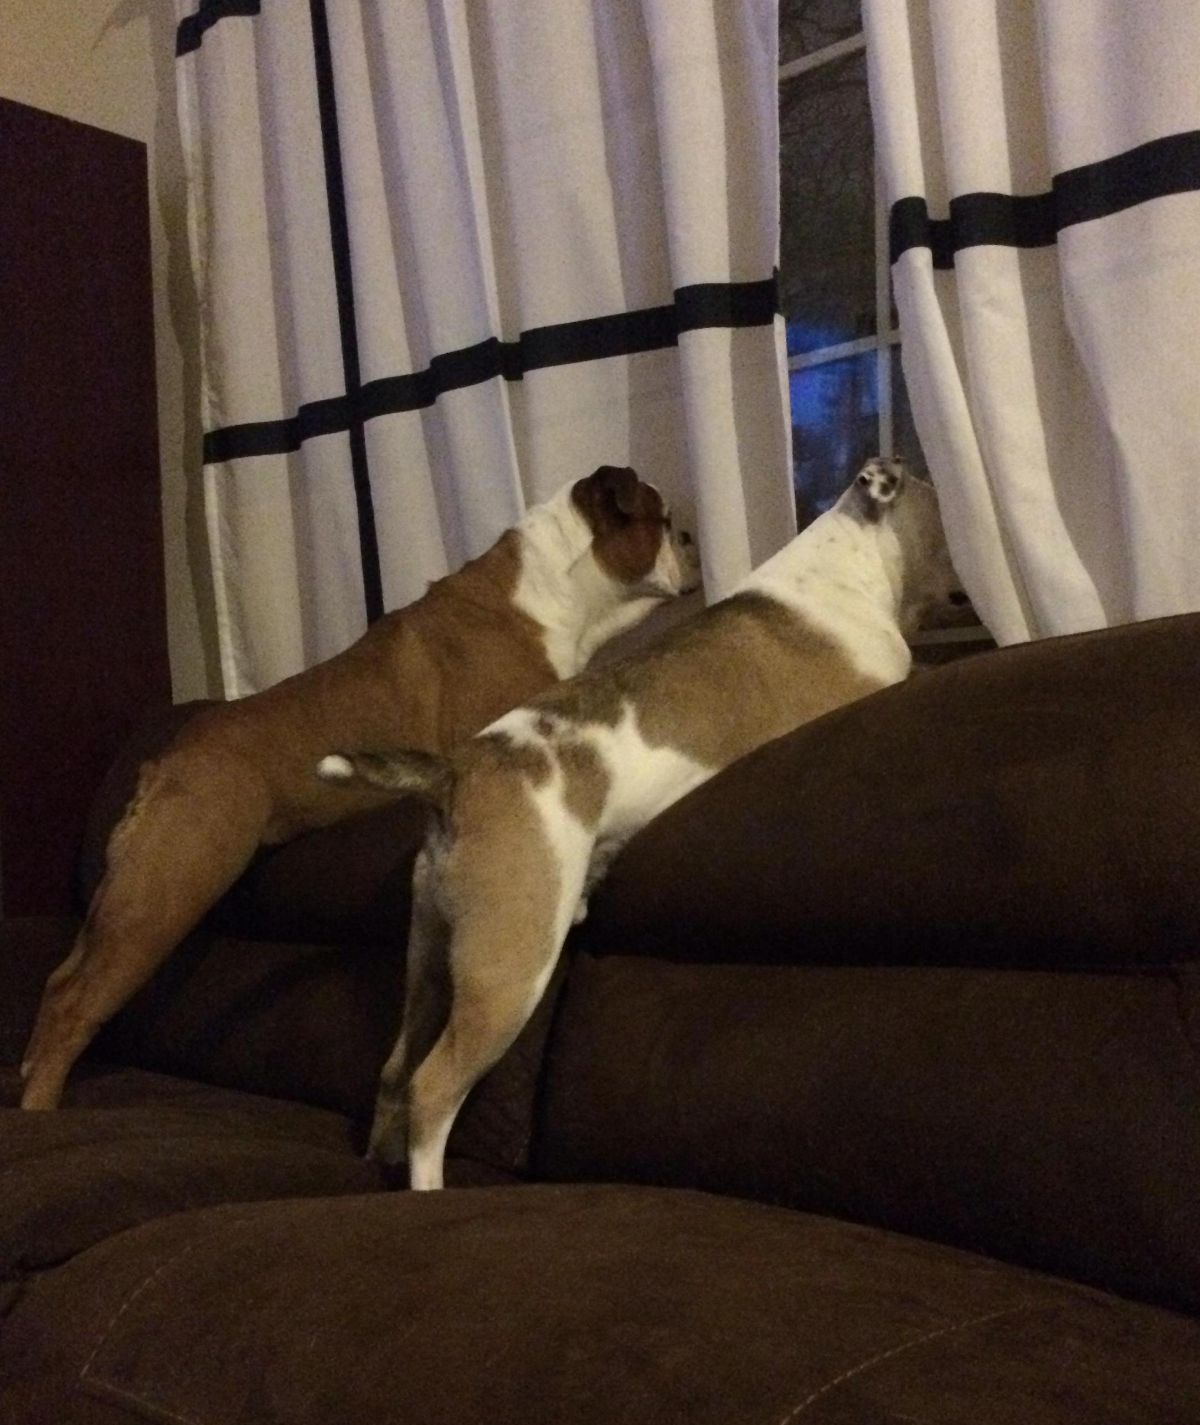 2 brown and white bulldogs standing with hind legs on brown sofa and one dog is looking out the window and the other one staring at a white curtain